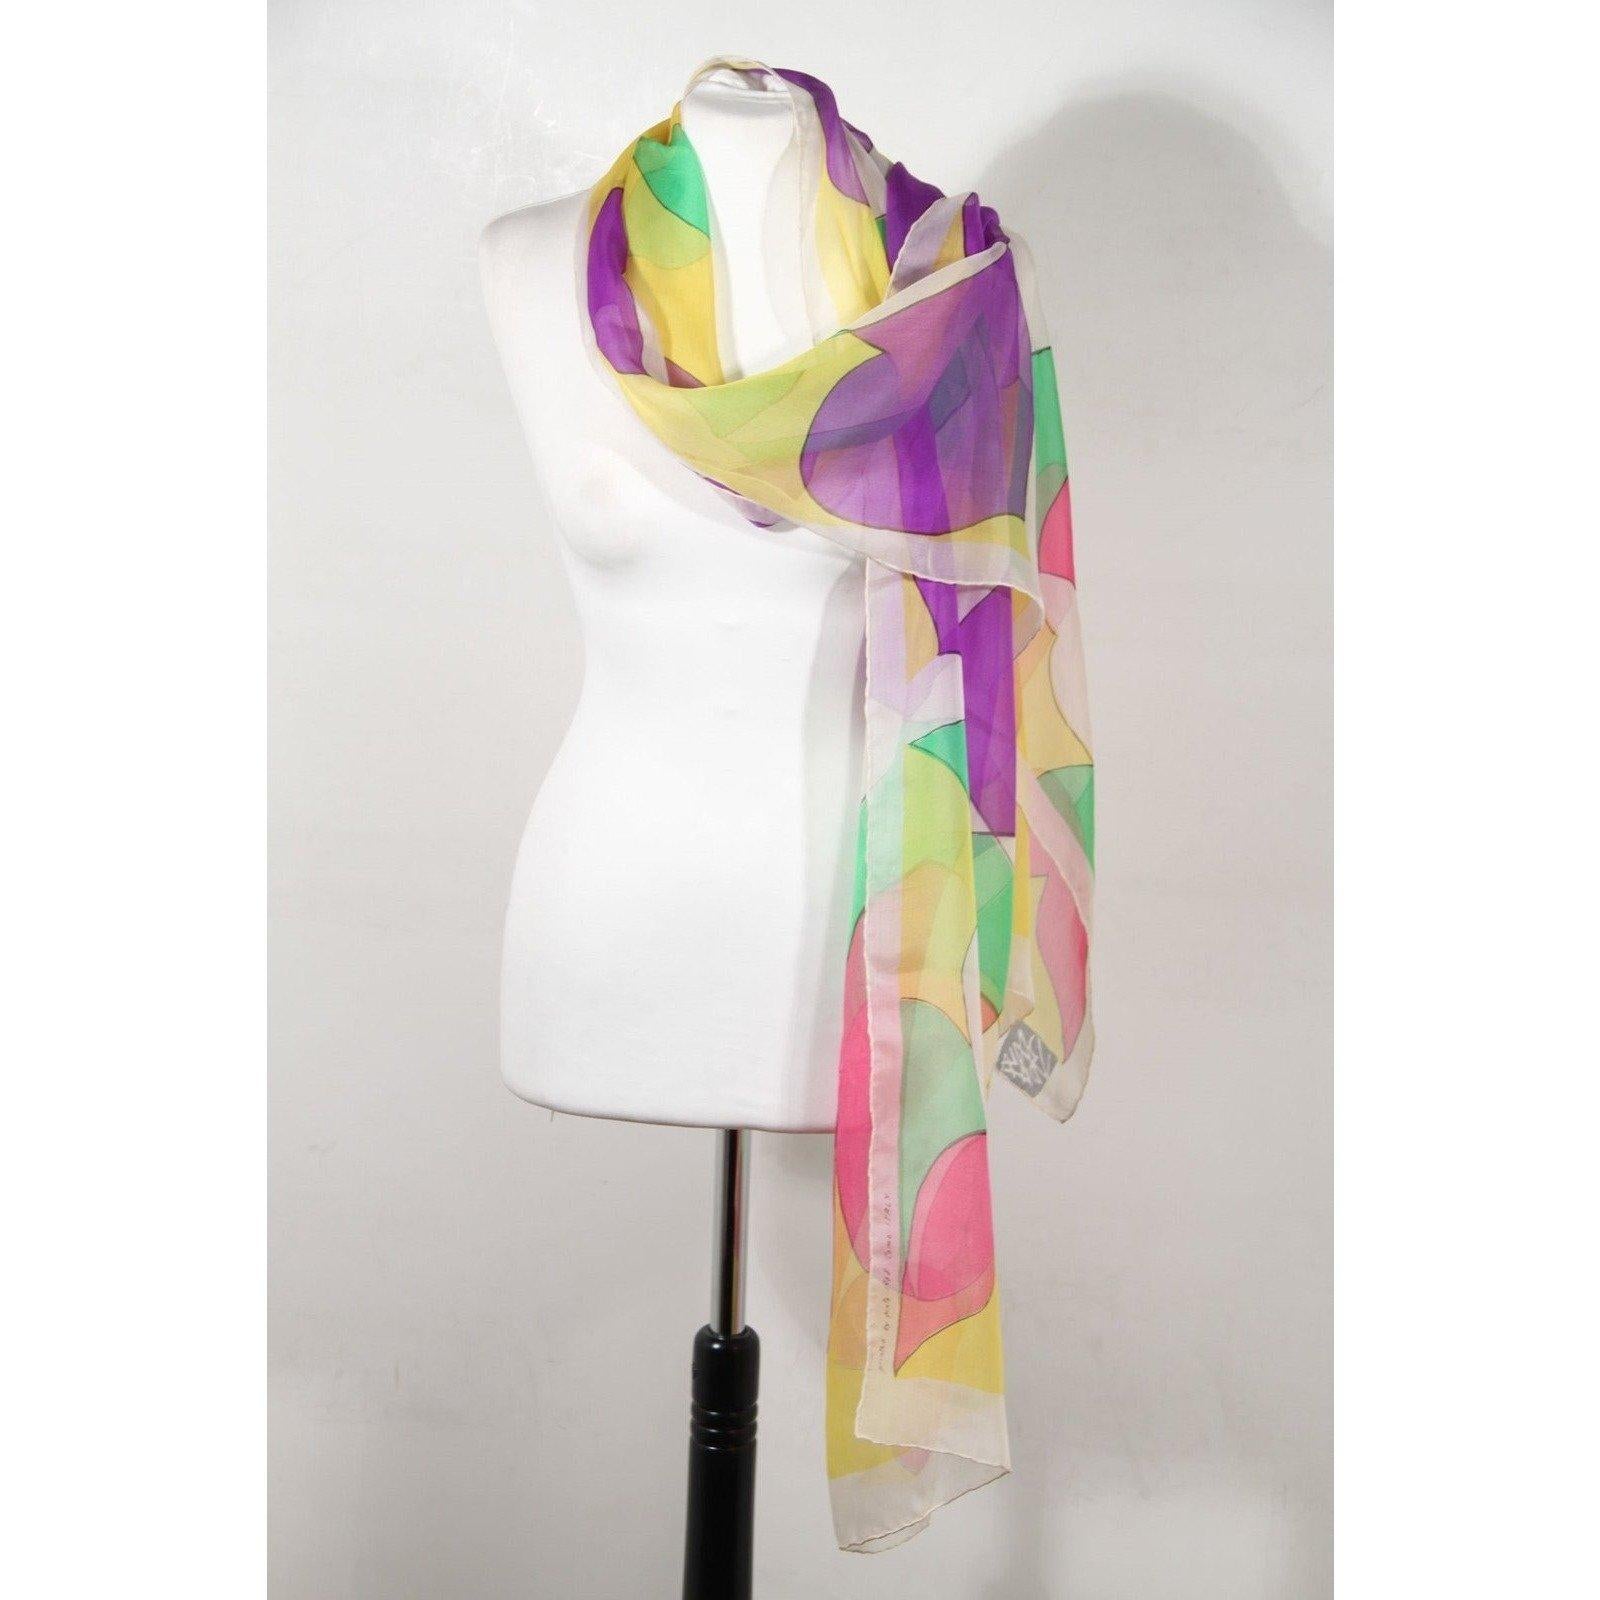 MATERIAL: Silk COLOR: Multicolor MODEL: Silk Scarf GENDER: Women SIZE: 83 1/2 inches / 213 cm x 16 1/2 inches / 41,9 cm COUNTRY OF MANUFACTURE: Italy Condition CONDITION DETAILS: B :GOOD CONDITION - Some light wear of use - gently used!some pulled